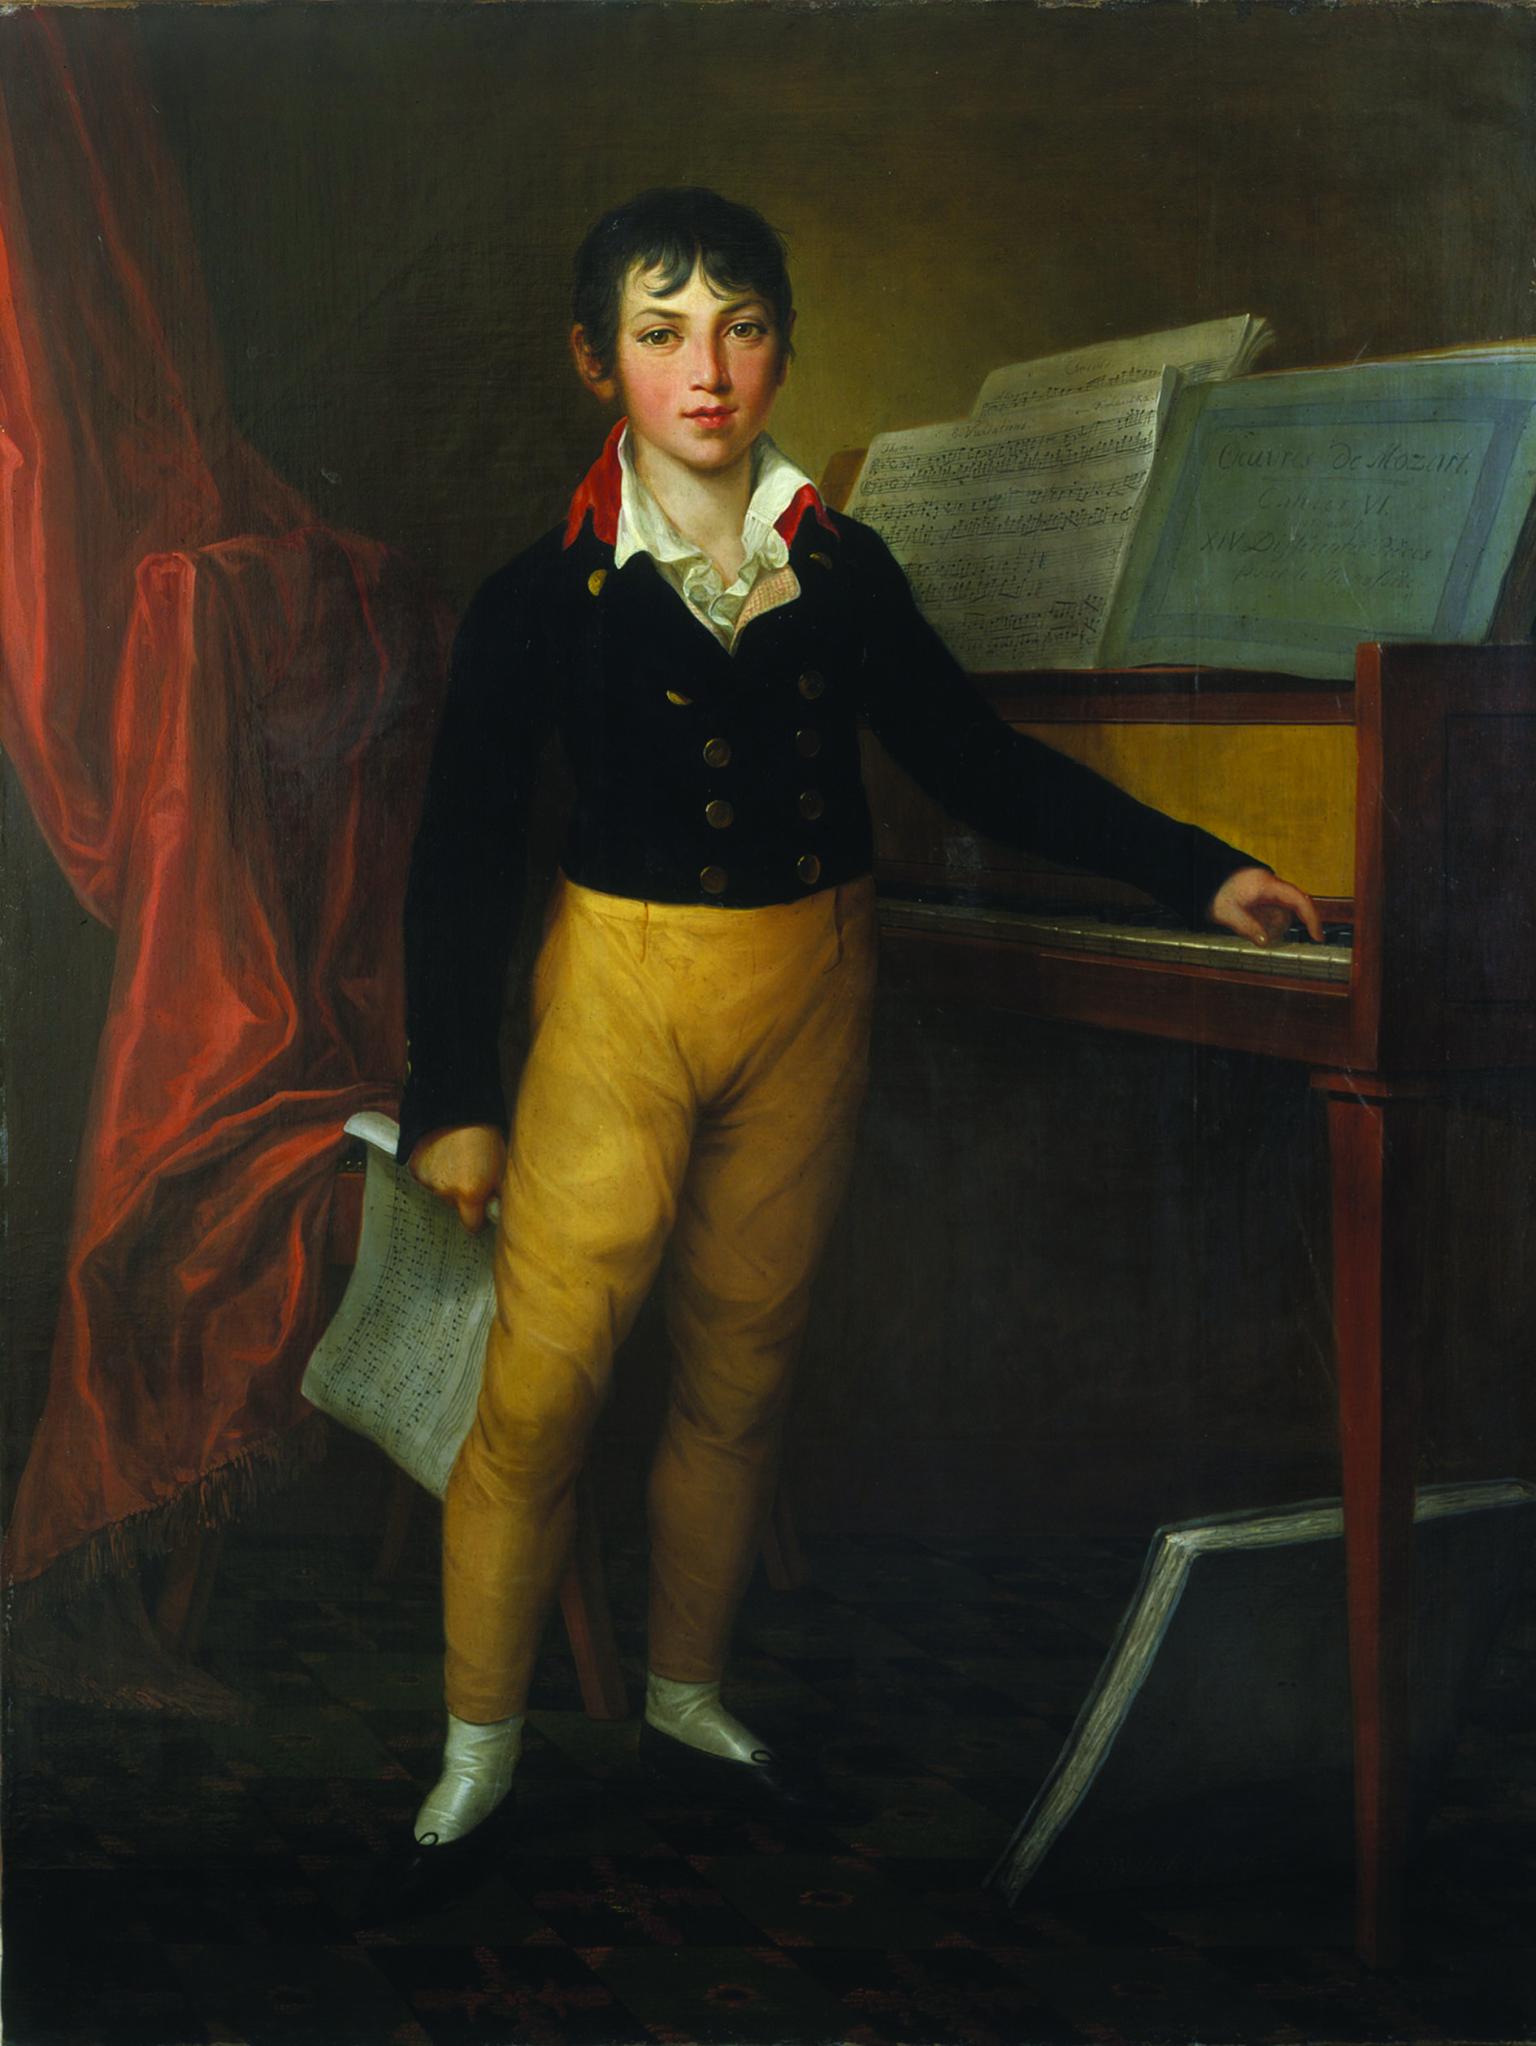 Portrait painting of young man standing next to piano and holding sheet music.